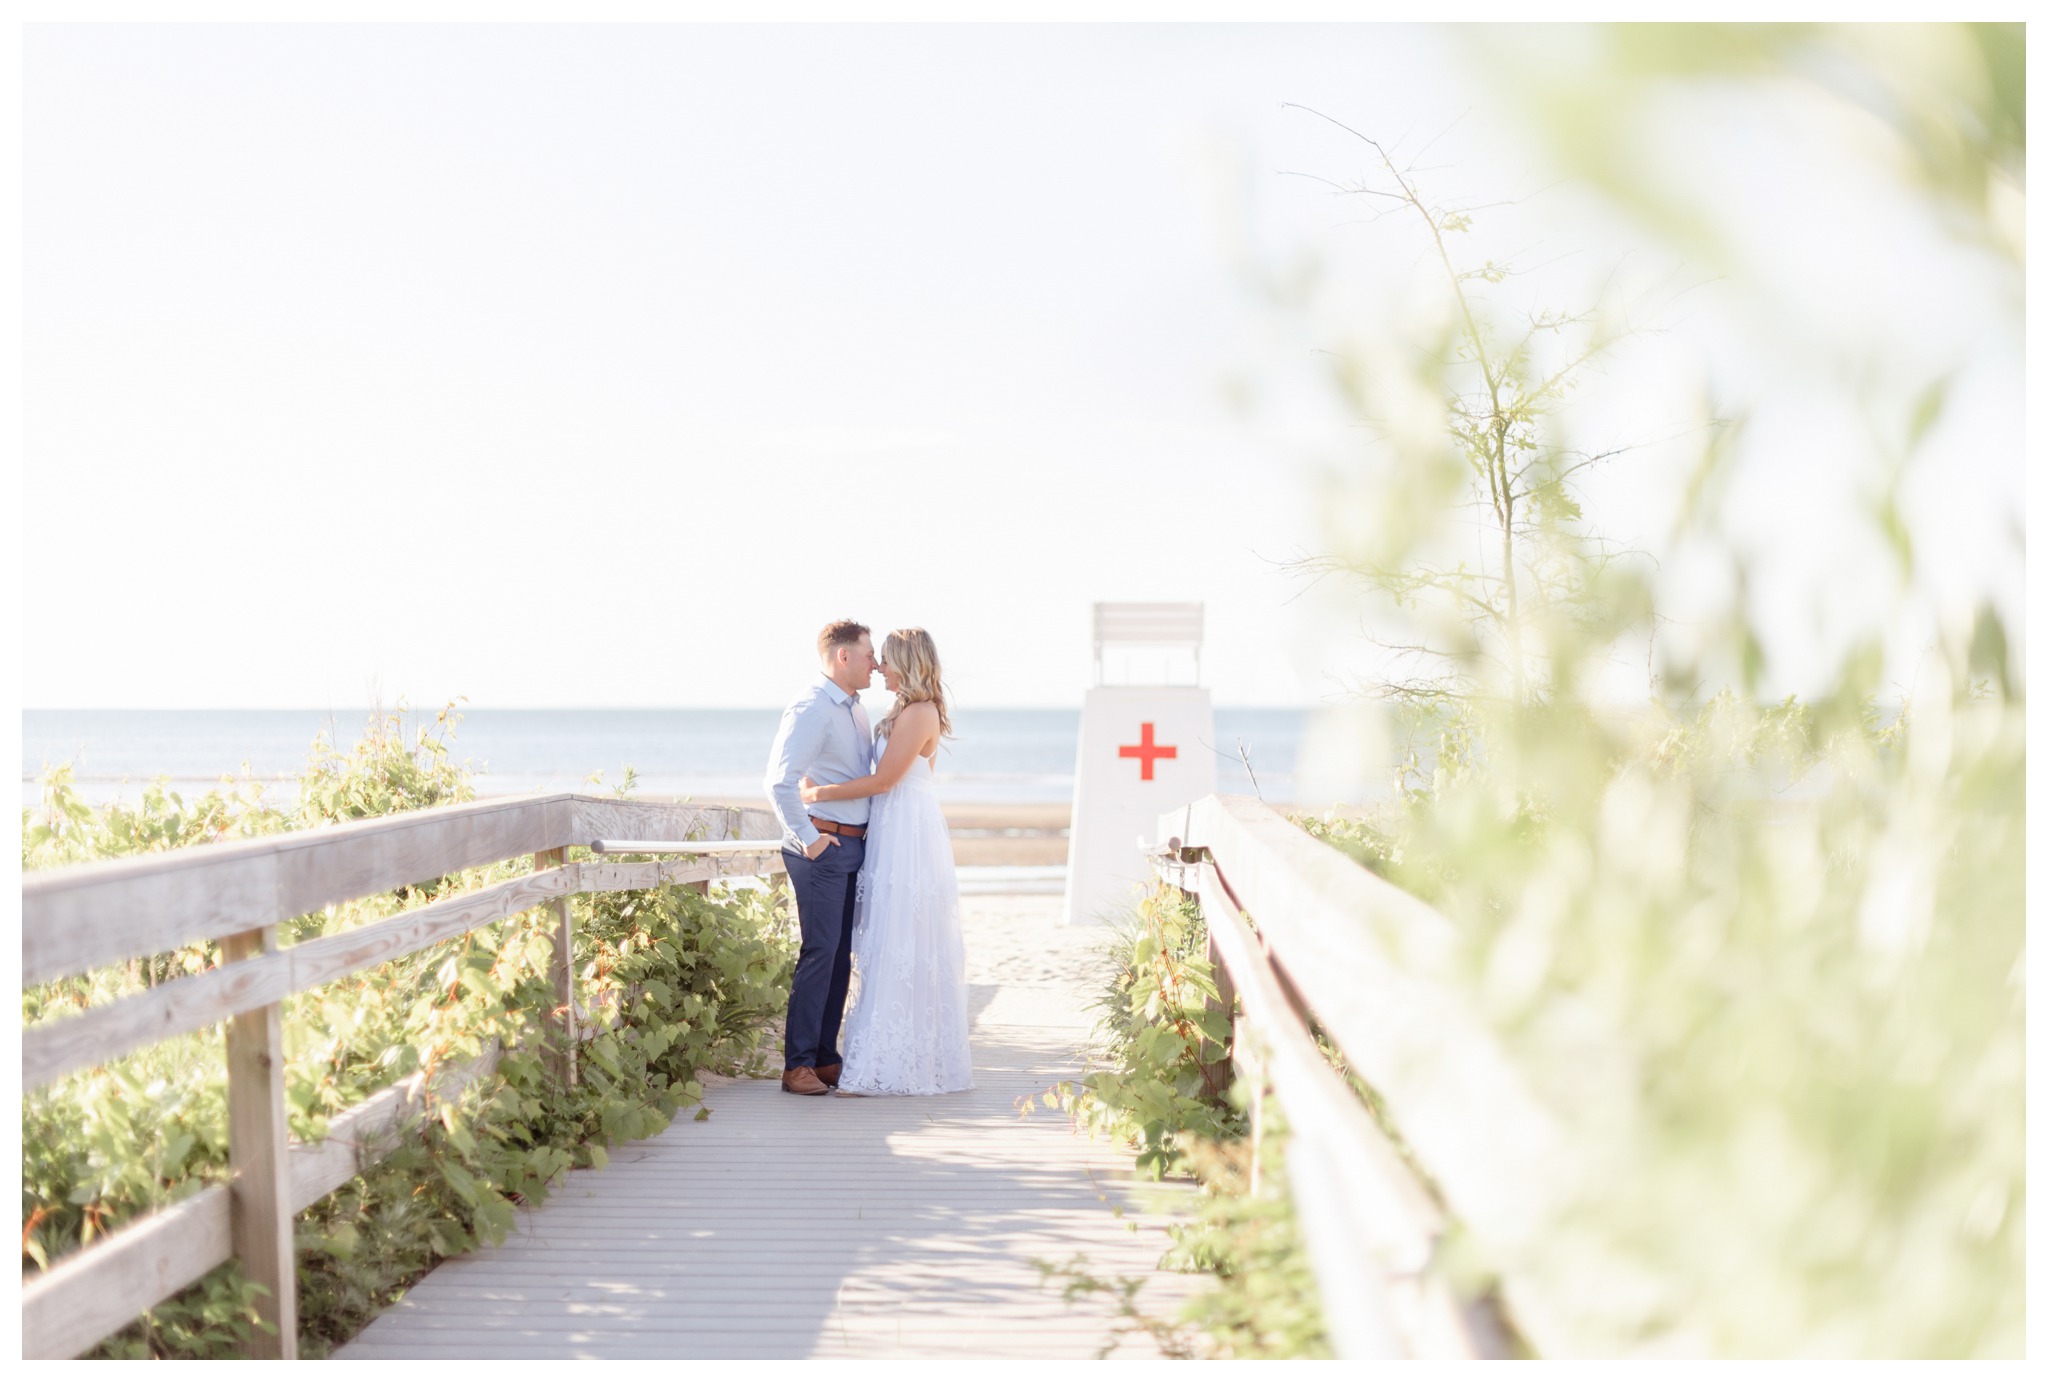 walnut beach engagement session in milford ct at silver sands beach on the boardwalk